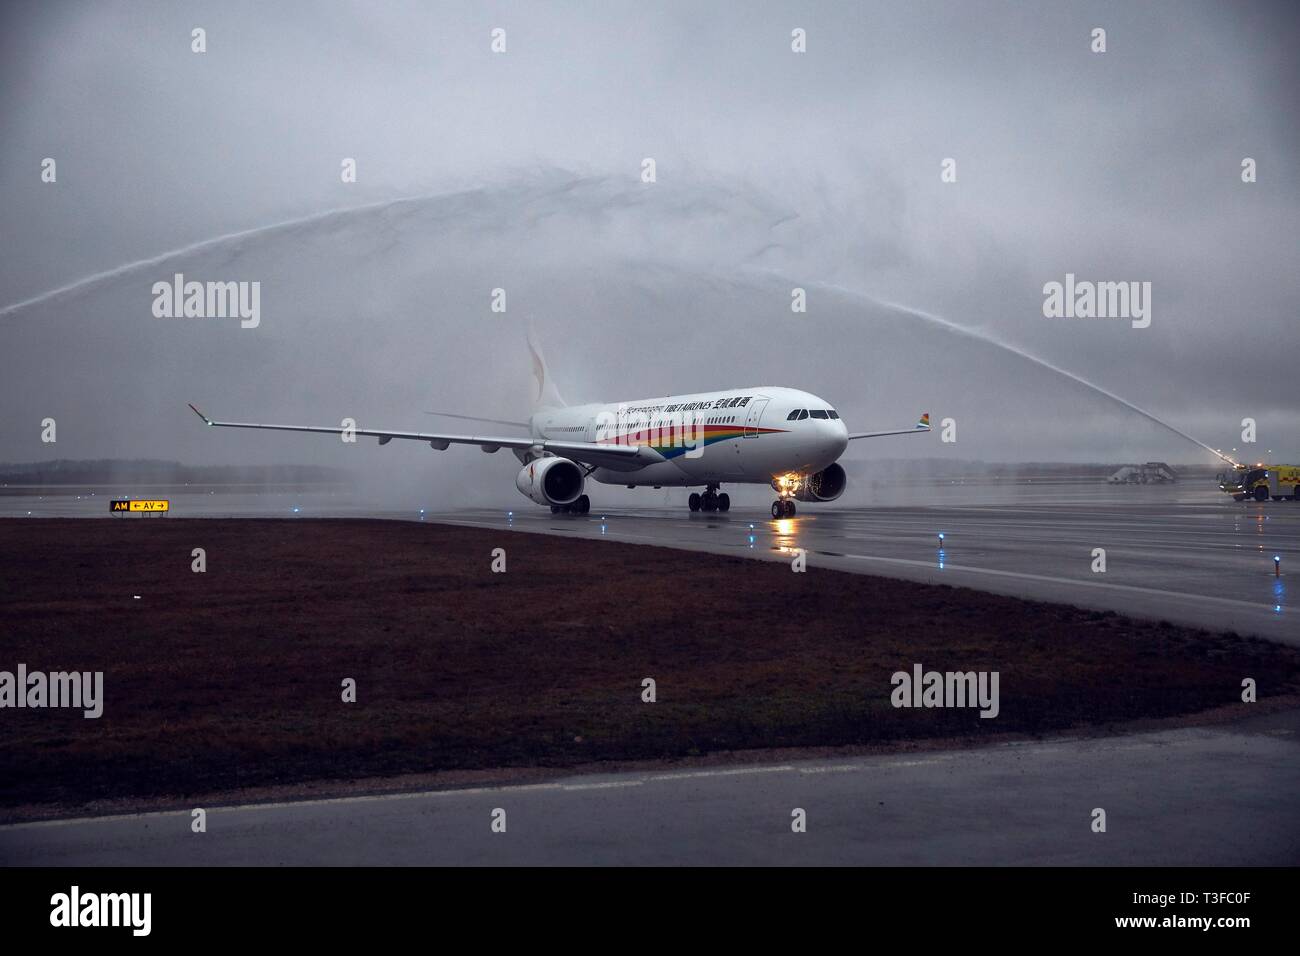 (190409) -- VANTAA, April 9, 2019 (Xinhua) -- Tibet Airlines' inaugural flight from Jinan, the capital city of eastern China's Shandong Province, lands at the Helsinki-Vantaa International Airport in Finland, April 8, 2019. An Airbus 330 operated by China Tibet Airlines landed at the Helsinki-Vantaa International Airport late on Monday, opening the weekly direct flights between Jinan, Shandong Province of China and Helsinki, capital of Finland. Tibet Airlines has one flight to Finland every week in April and will possibly run two weekly flights in June. (Xinhua/Finavia) Stock Photo